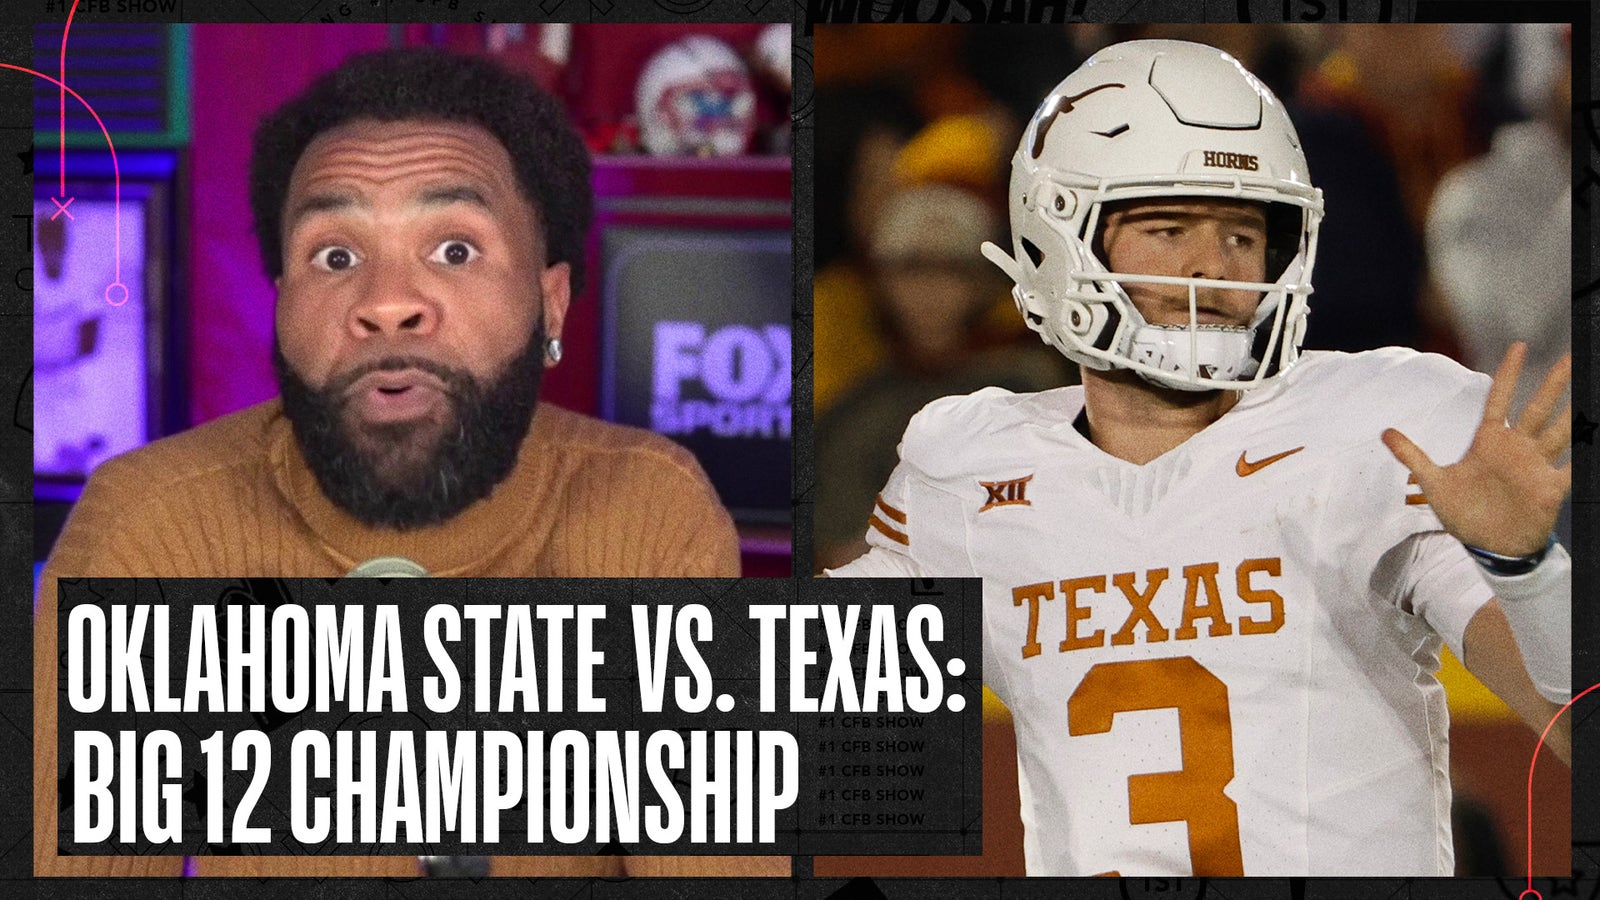 Previewin the battle for the Big 12 championship